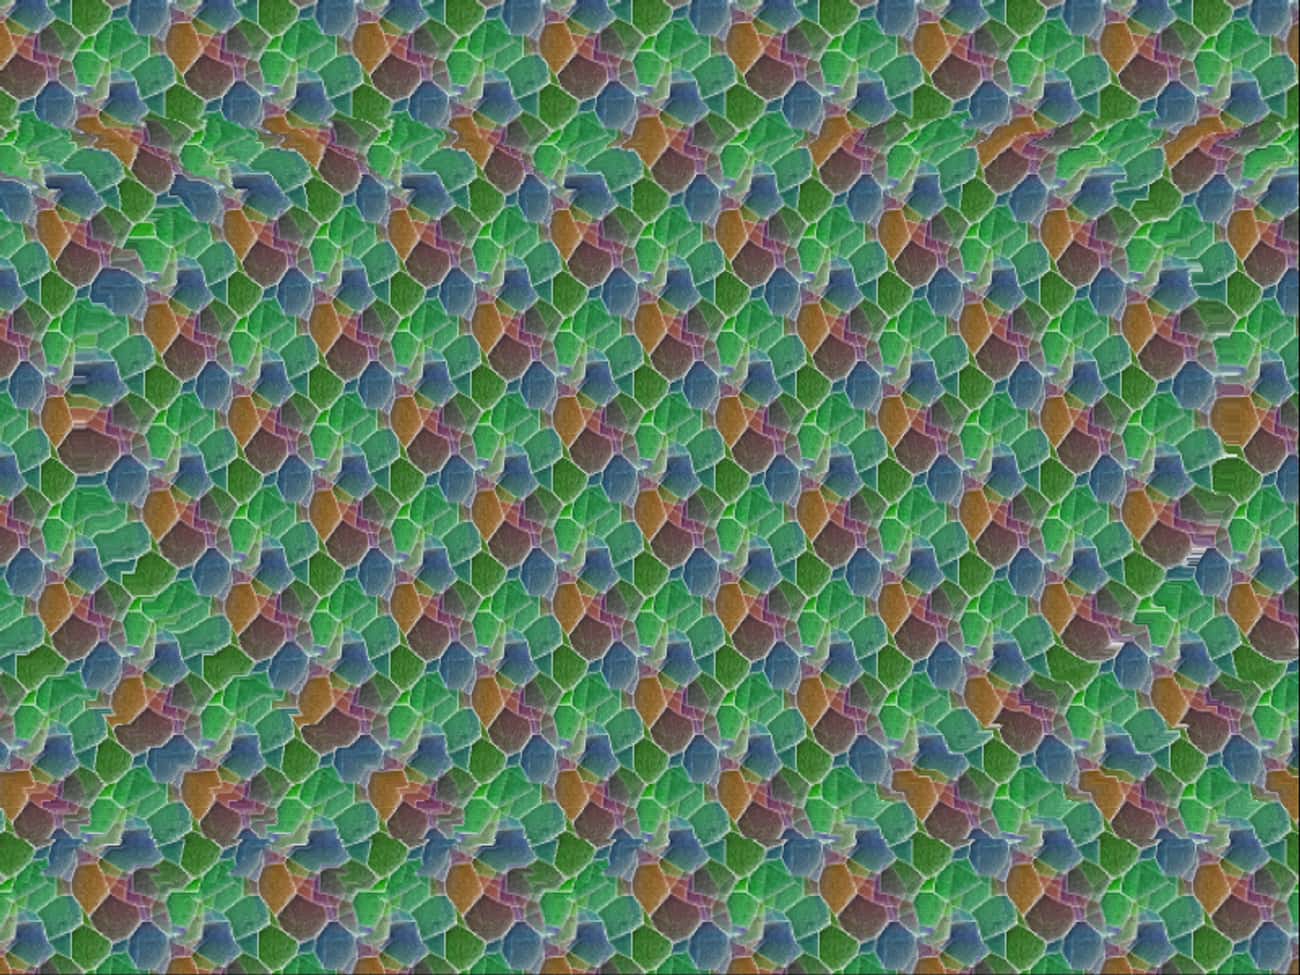 Why Can't I See Magic Eye Pictures?